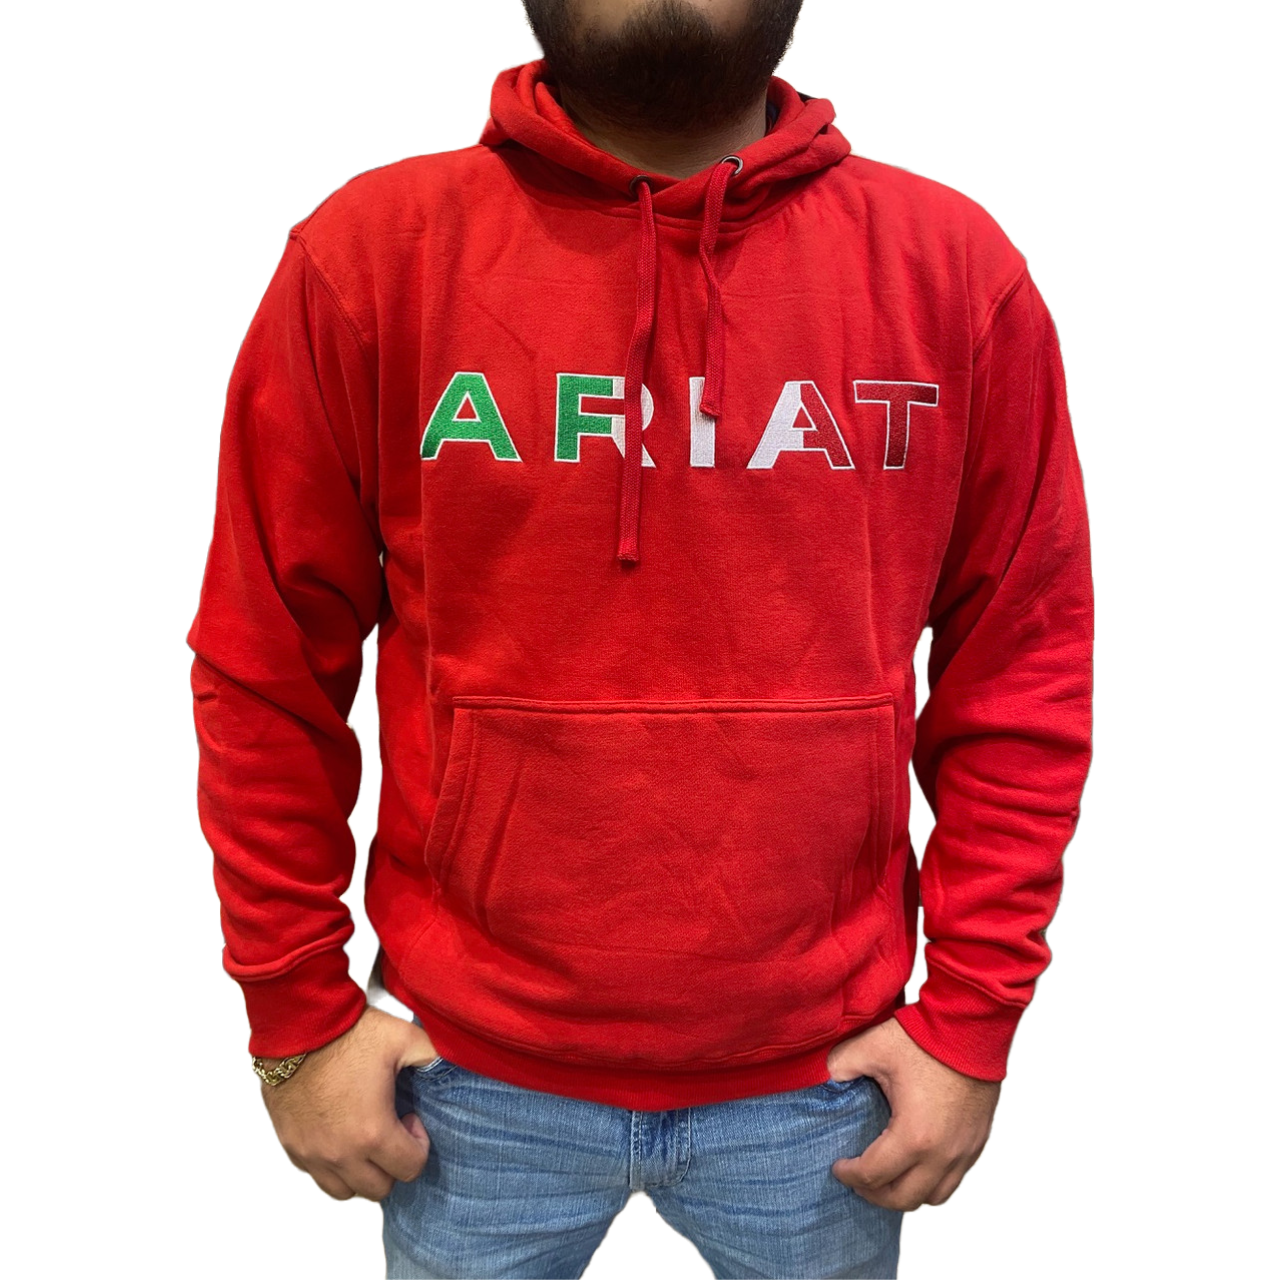 Ariat® Men's Red Embroidered Mexico Graphic Pullover Hoodie 10043101